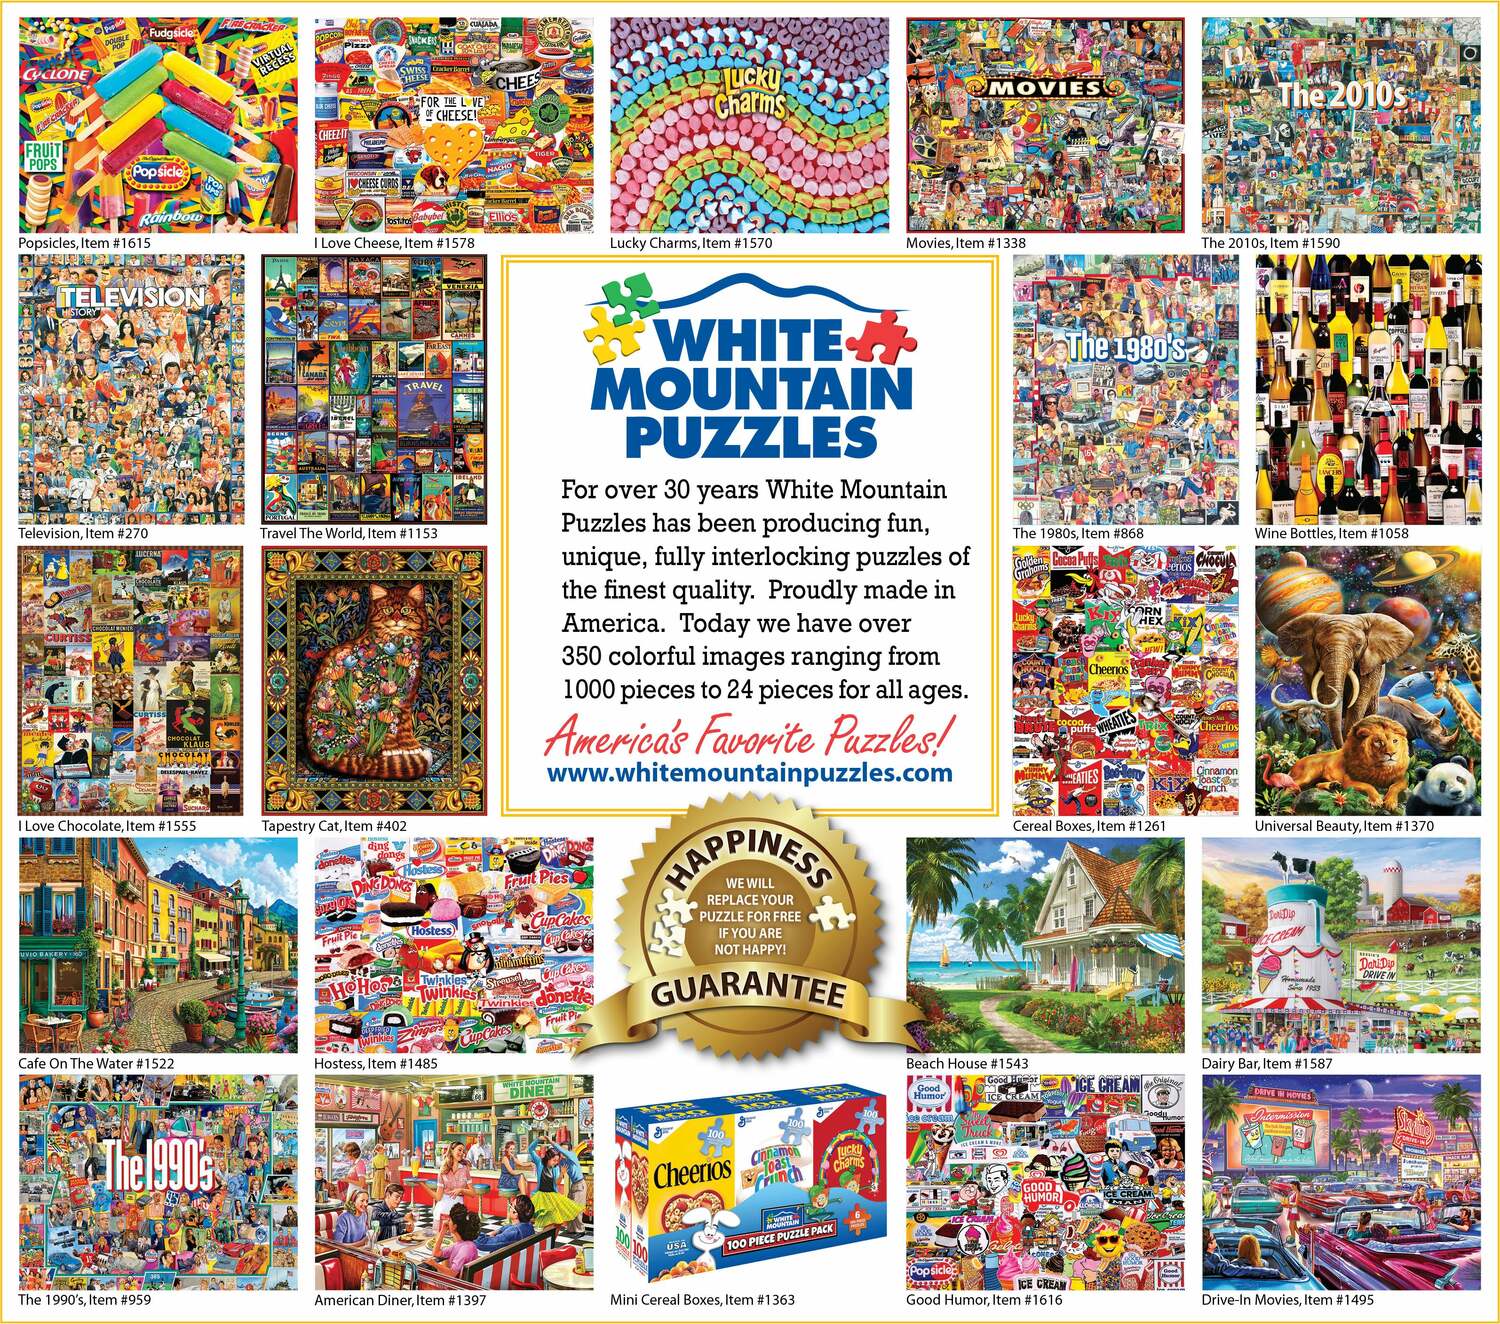 Television History Jigsaw Puzzle